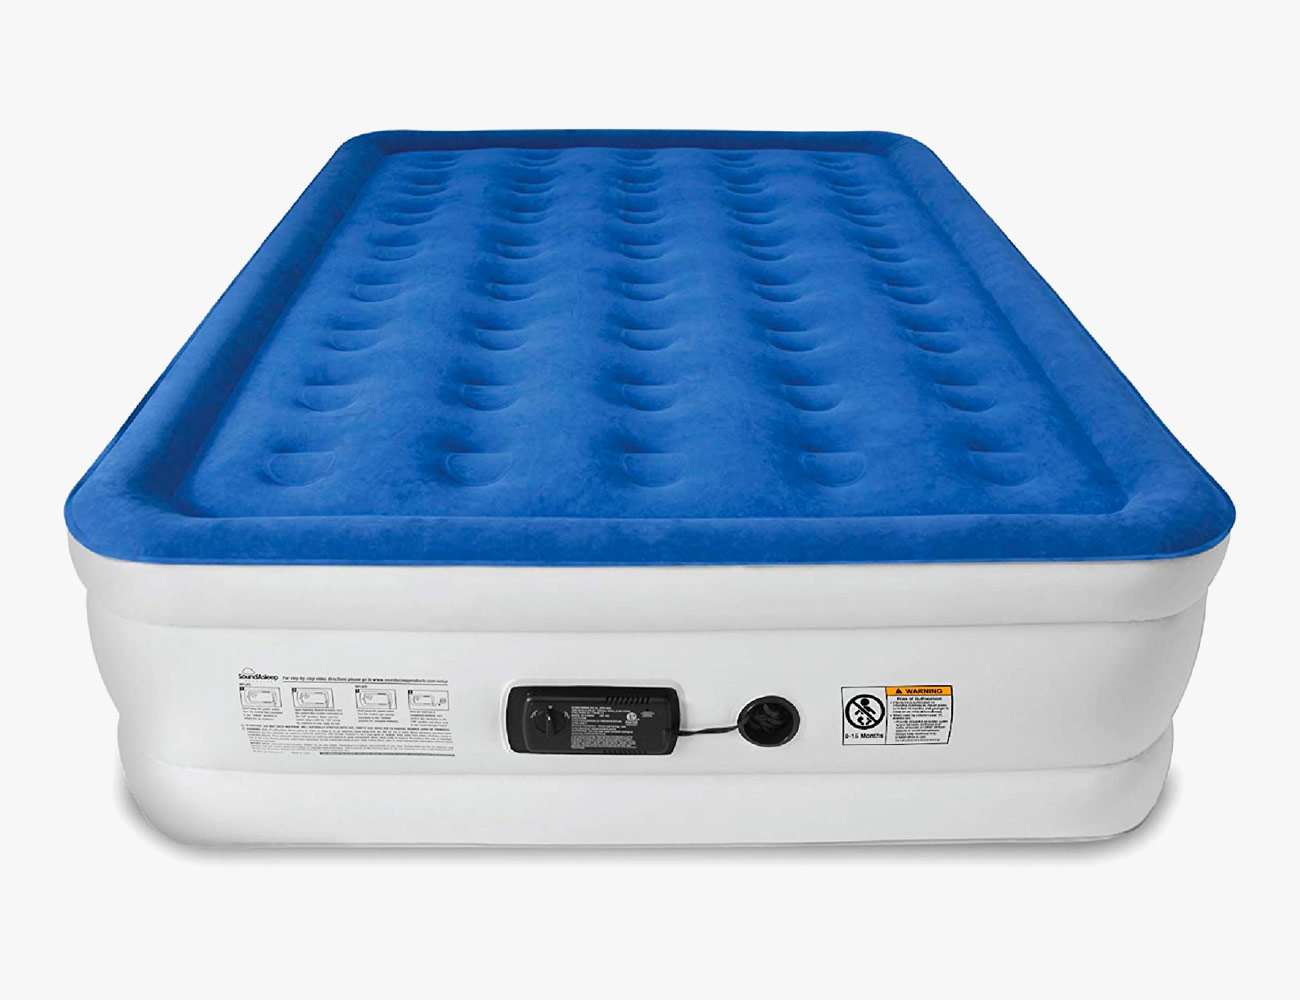 cheapest place for air mattresses